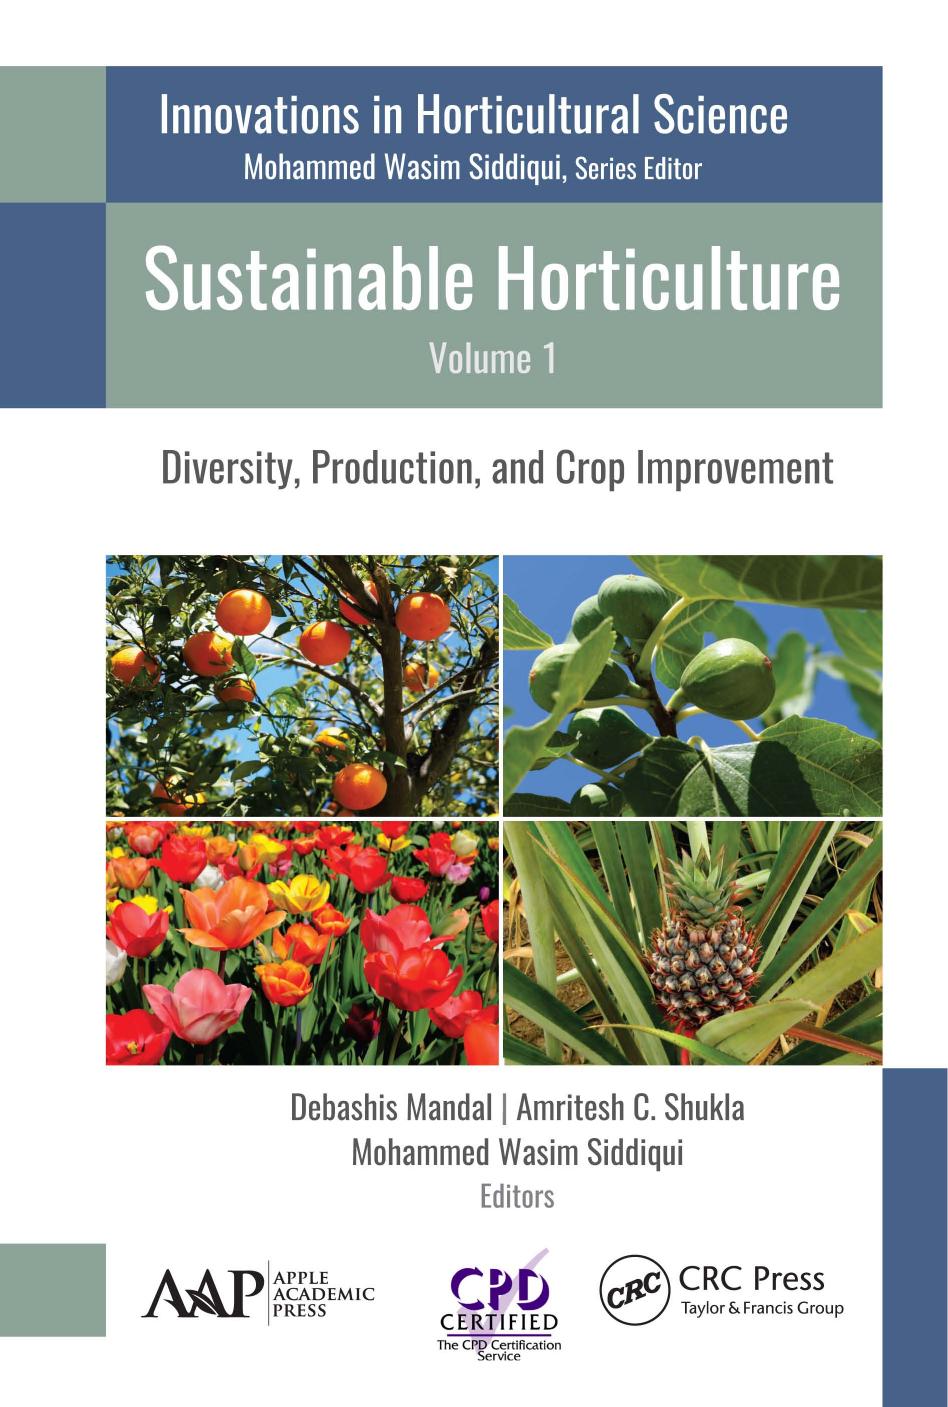 SUSTAINABLE HORTICULTURE Volume 1